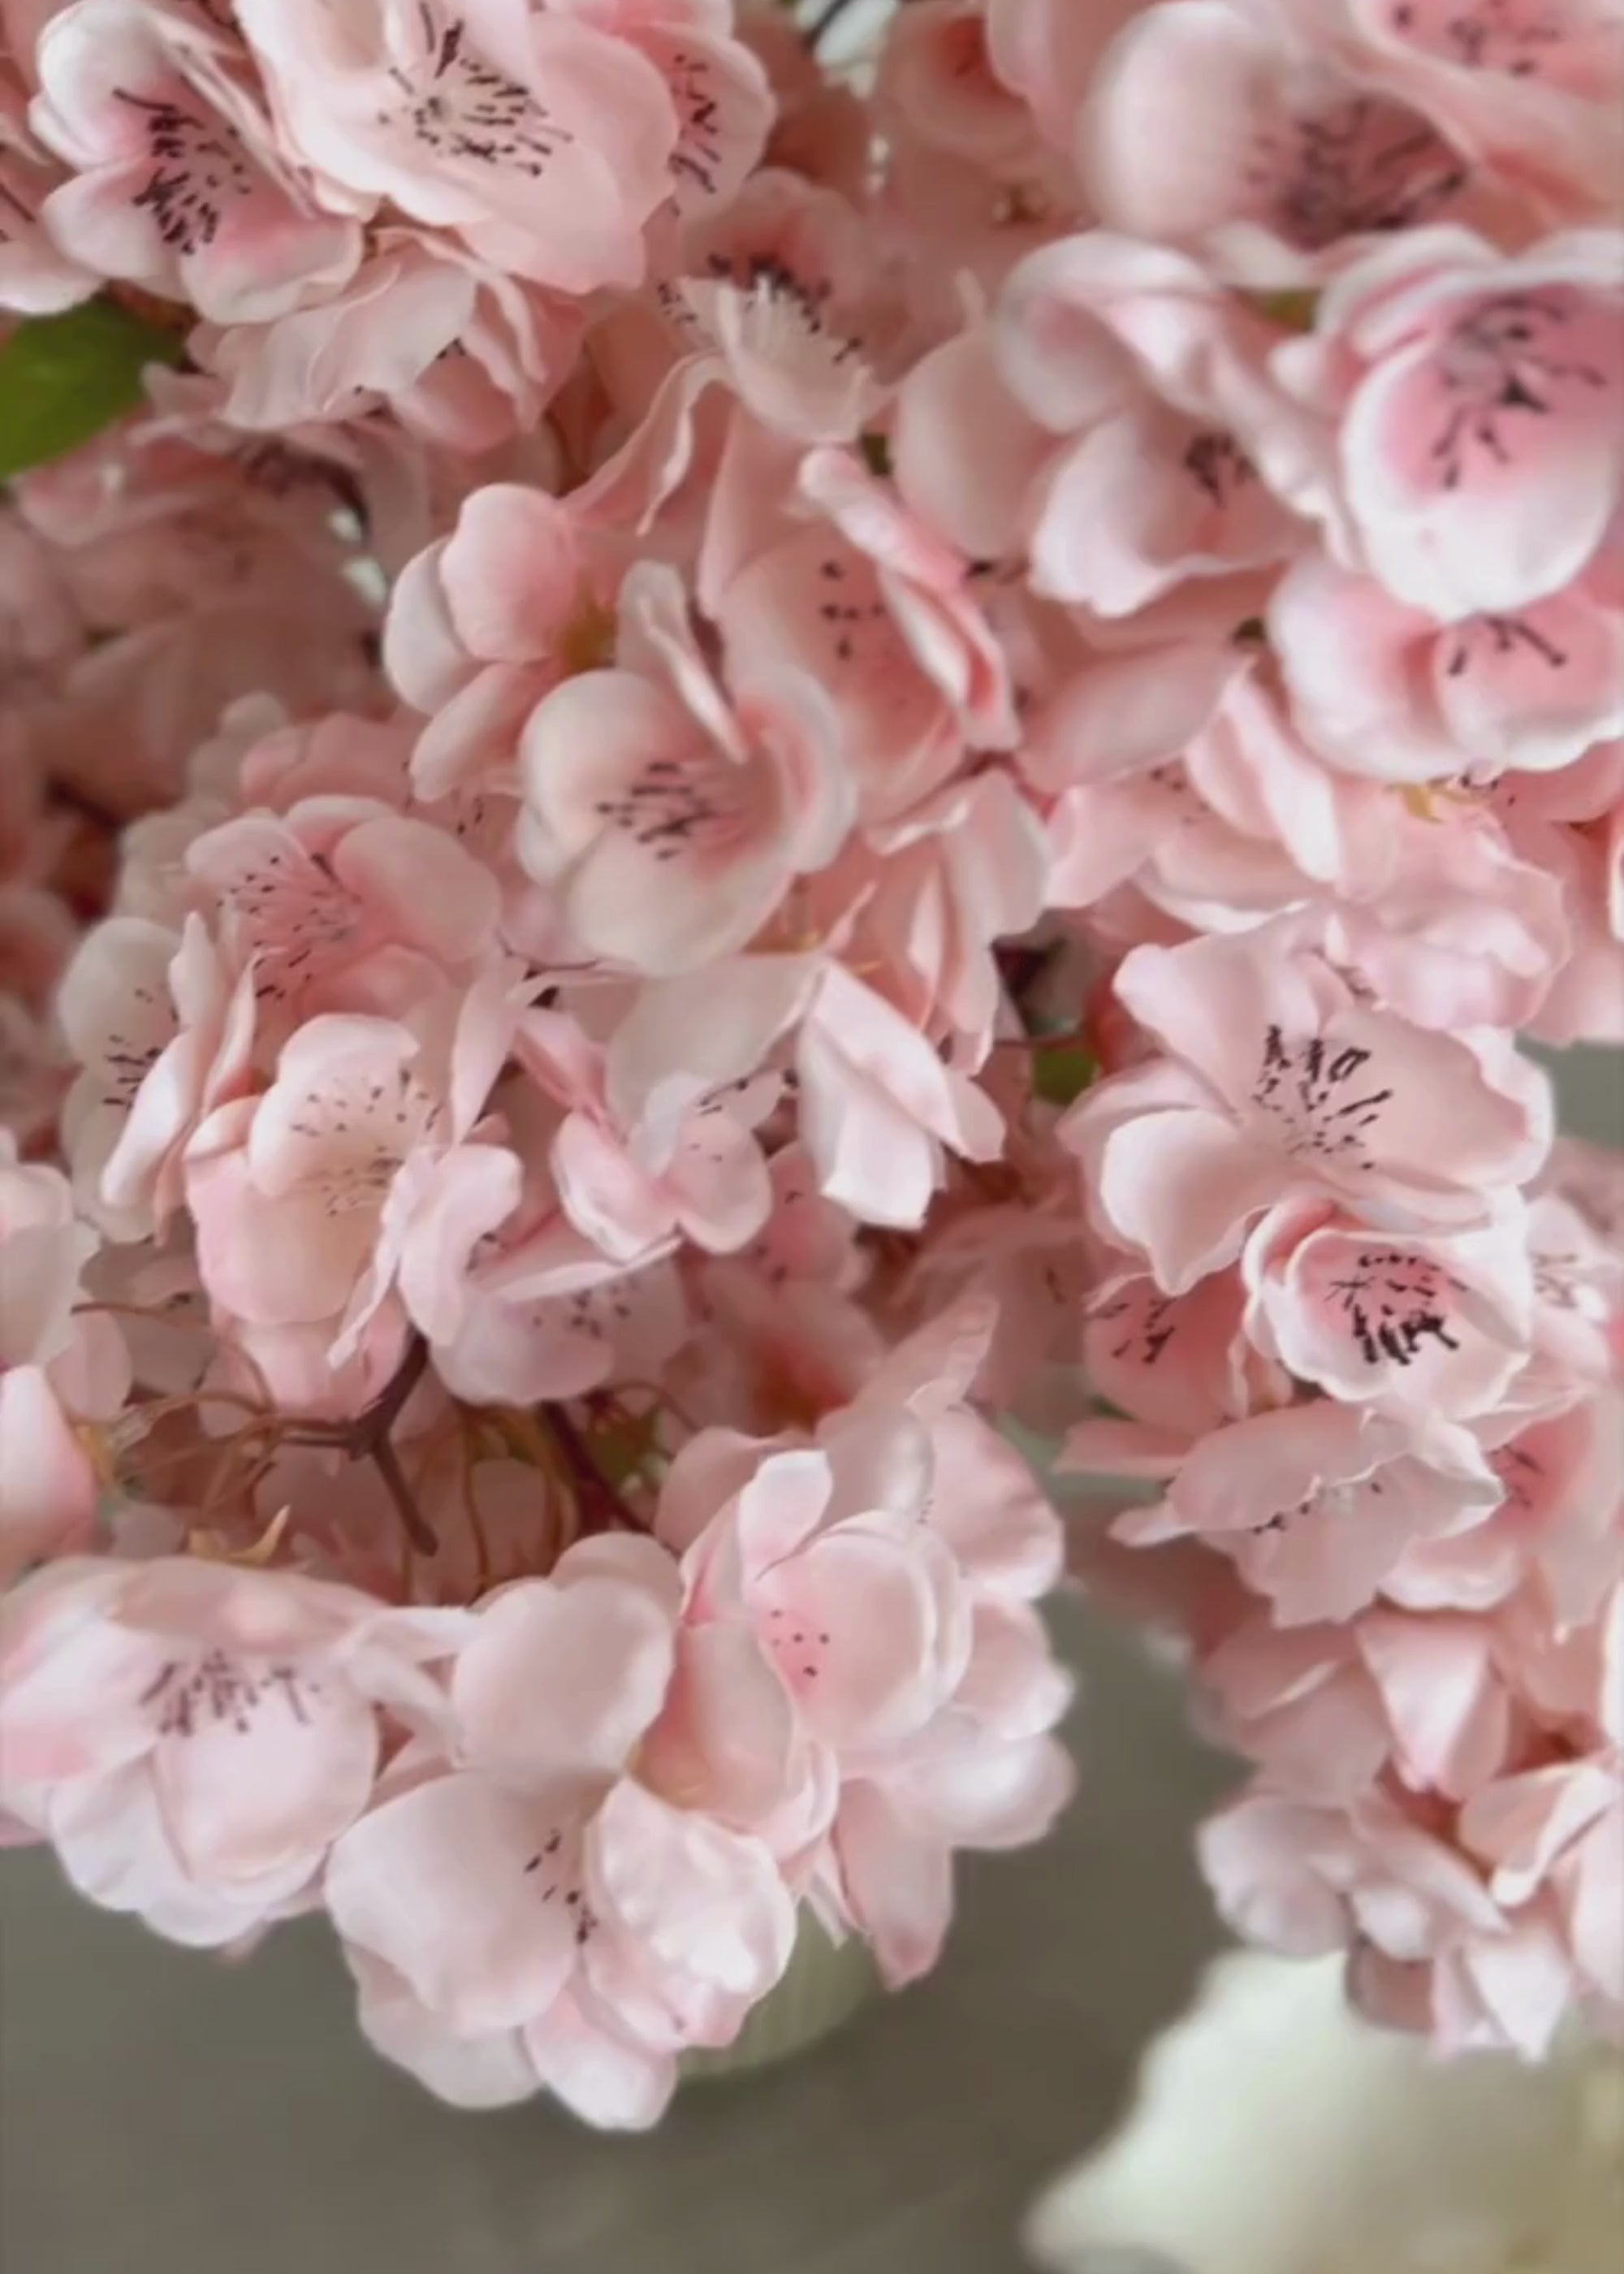 Video of Pink Cherry Blossoms